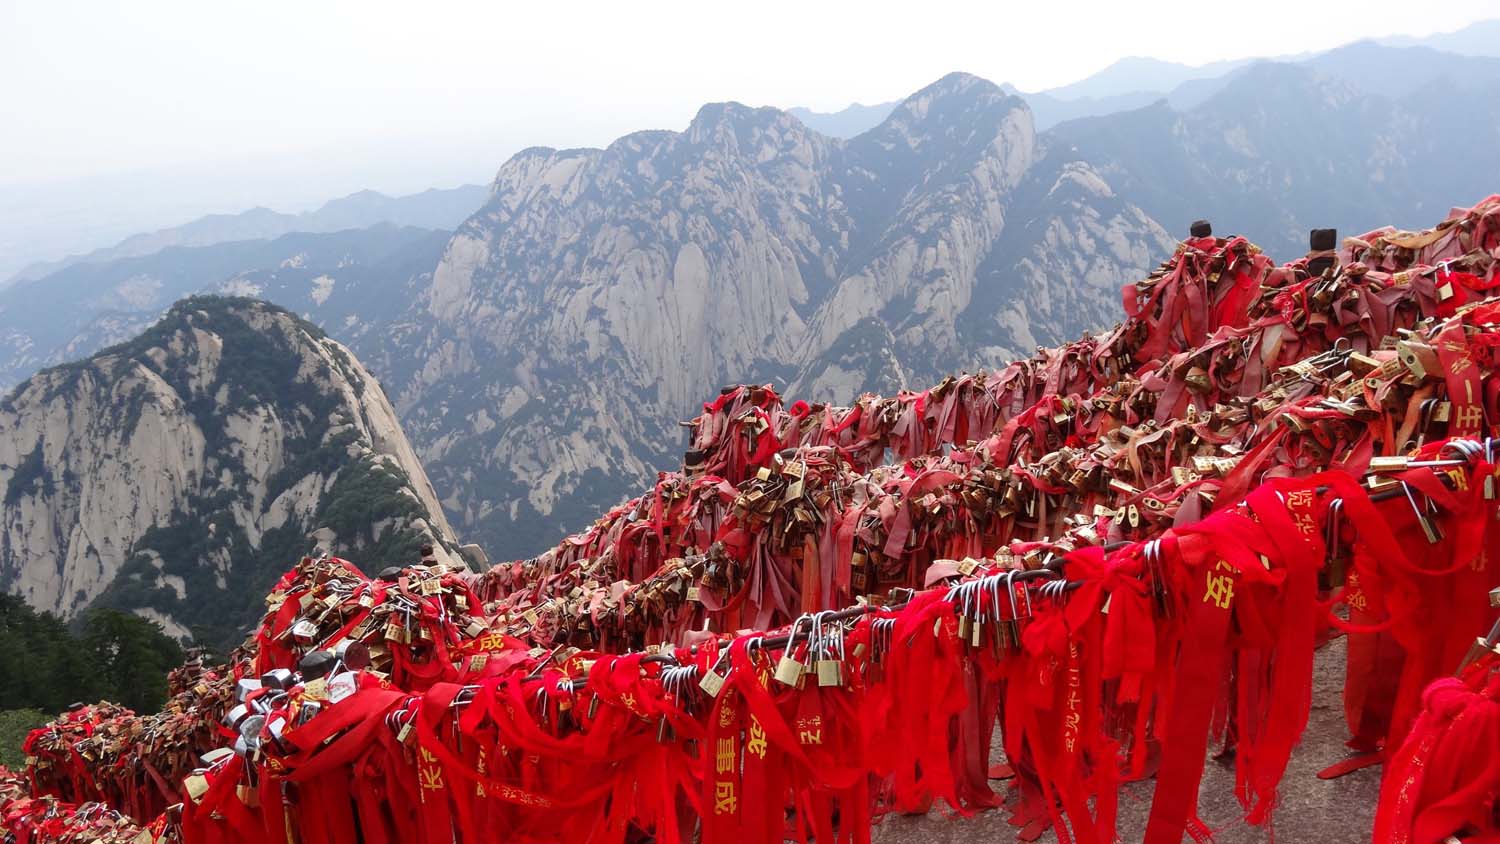 lots of couples leave a padlock with their names engraved in it on the mountain, often together with a red piece of cloth for good luck